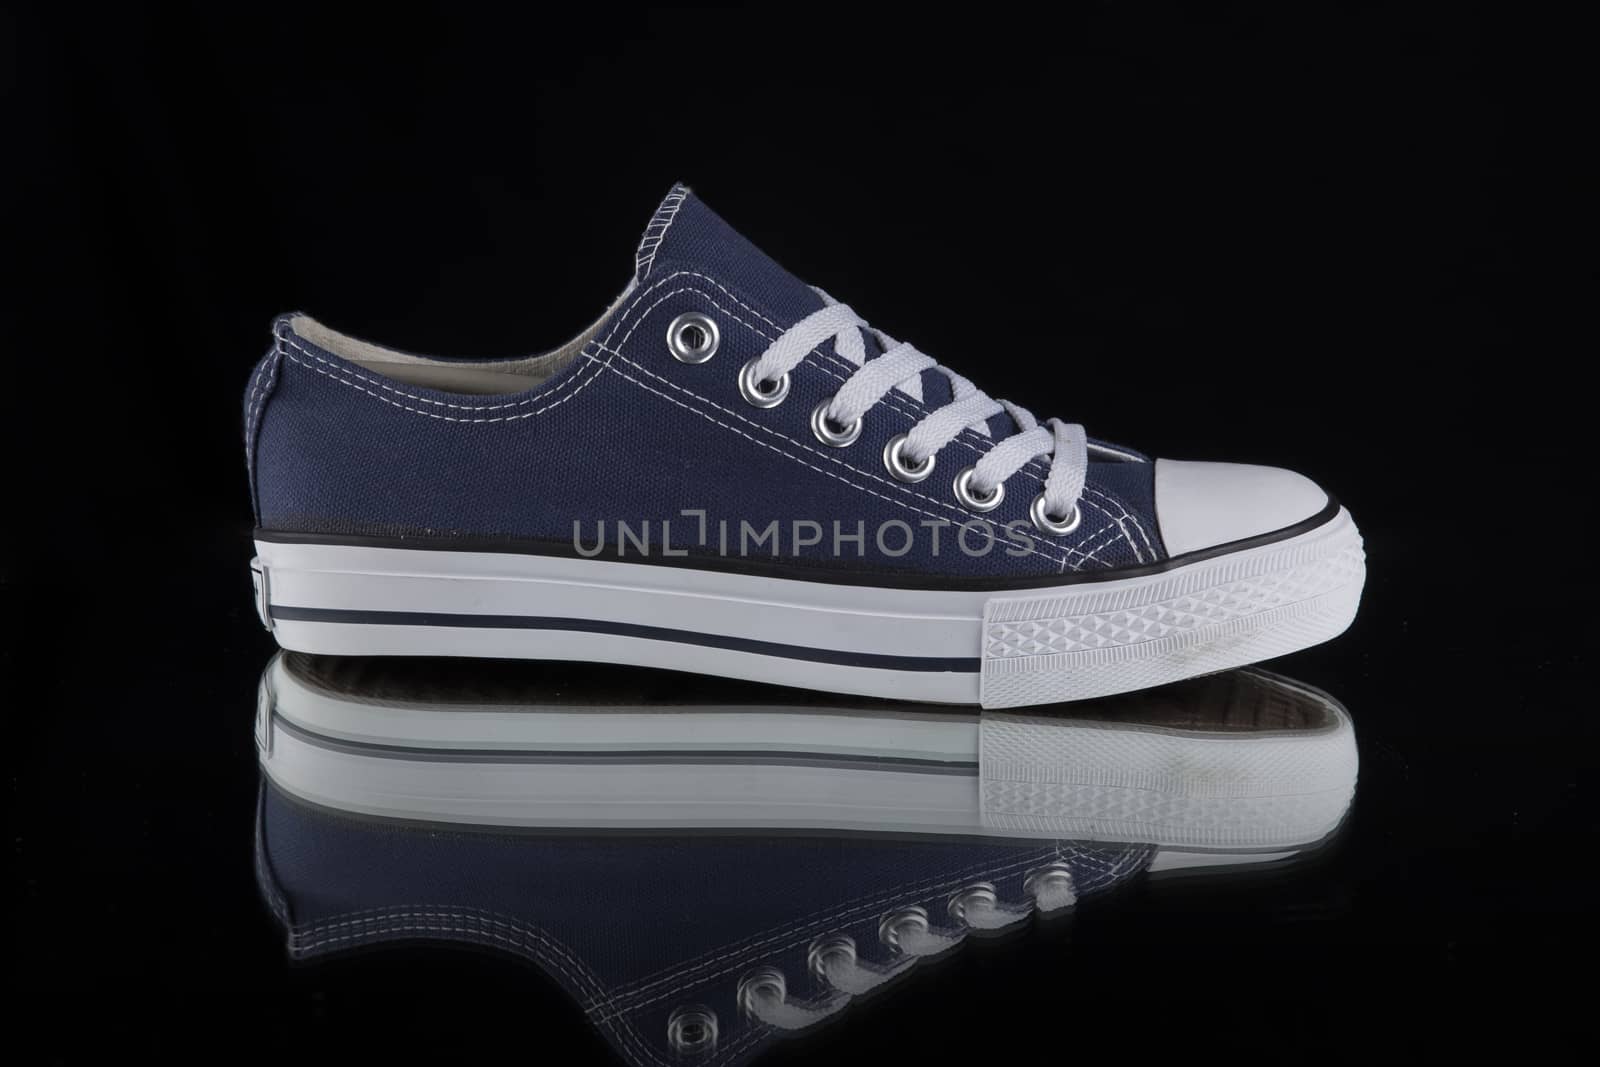 Blue and white sneaker on black background, isolated product.